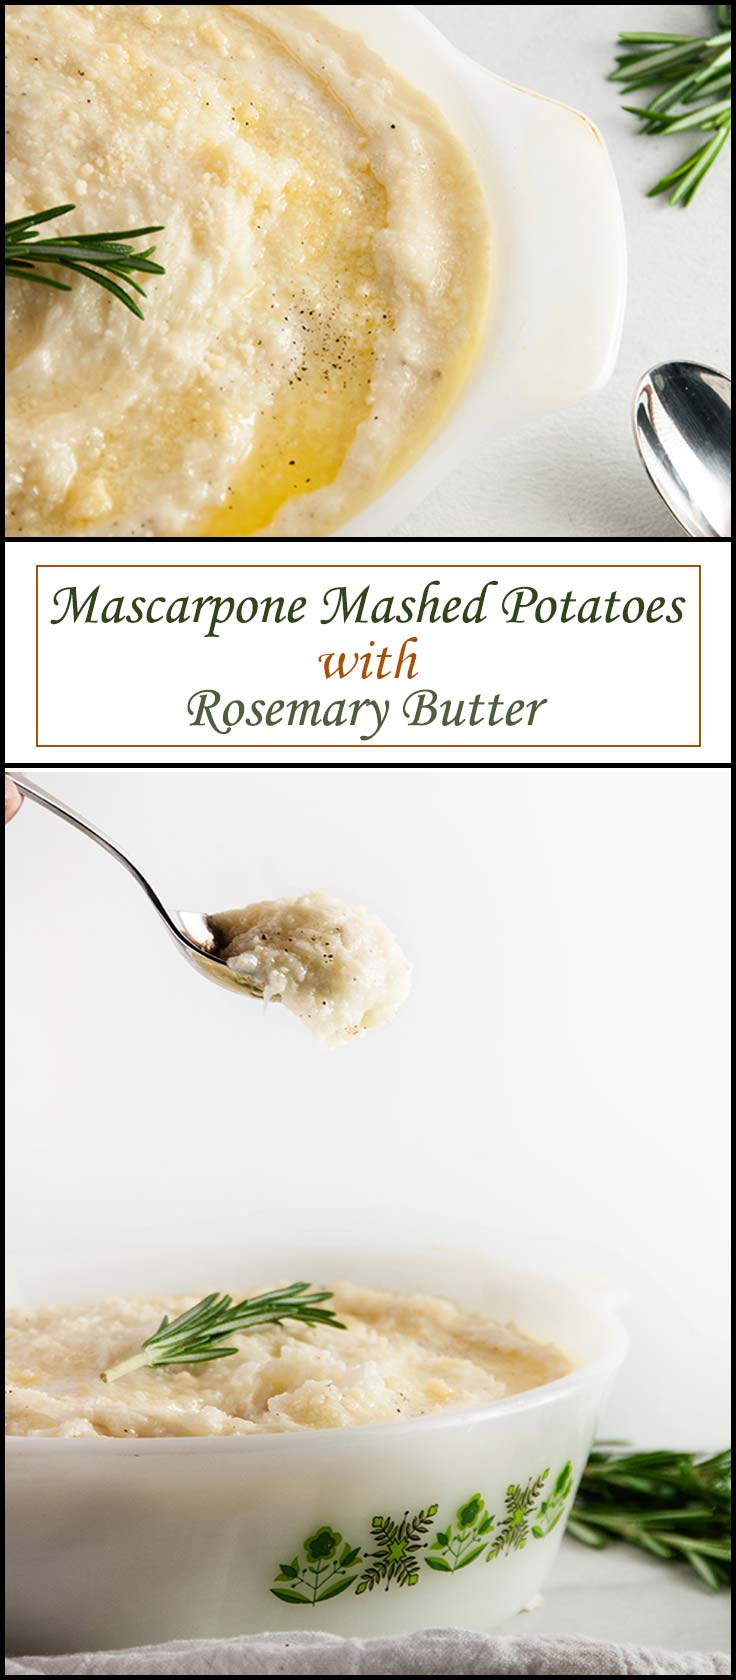 Mascarpone Mashed Potatoes with Rosemary Butter from www.seasonedsprinkles.com